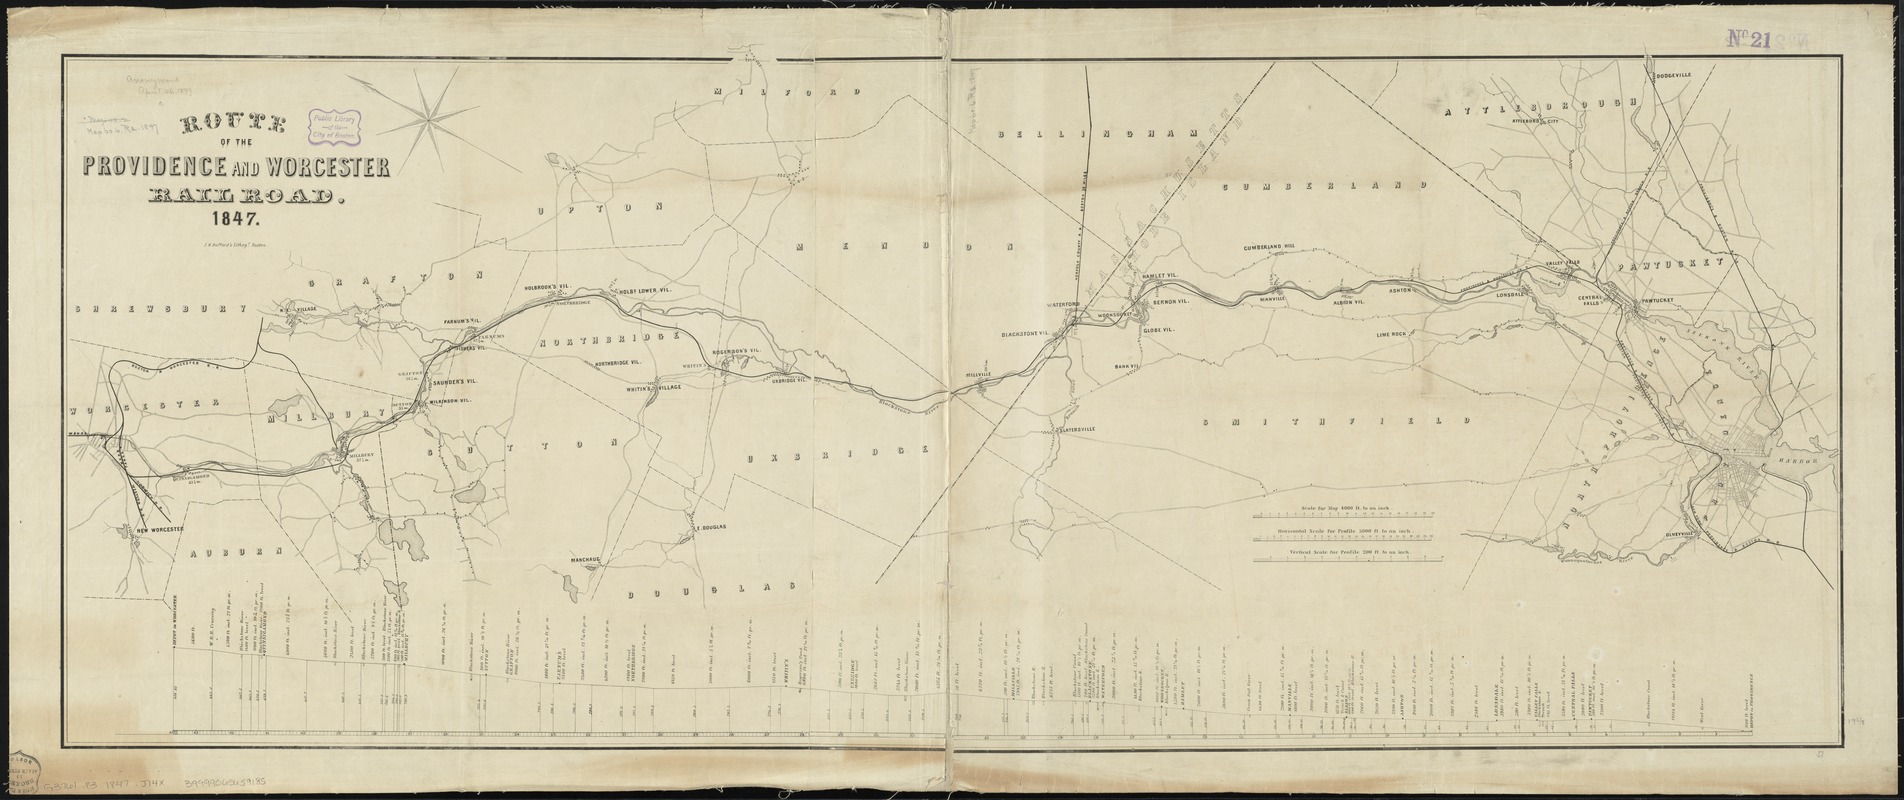 Route of the Providence and Worcester rail road